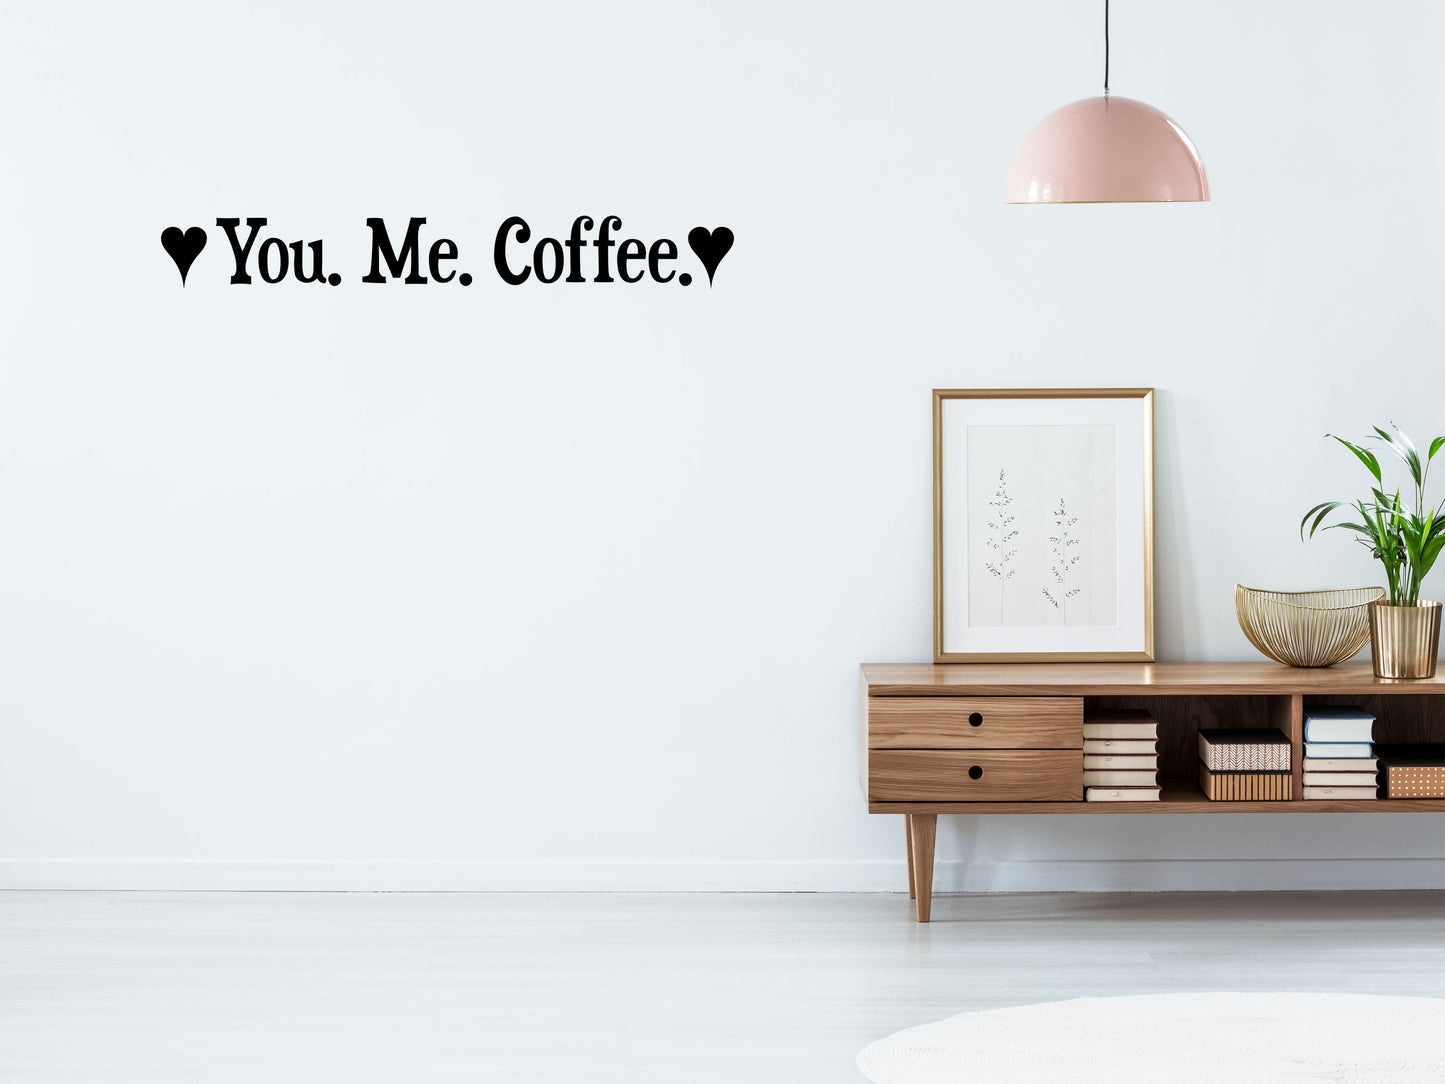 You Me Coffee Vinyl Quote Sticker- Inspirational Wall Decals Home Decor Decals Inspirational Wall Signs 